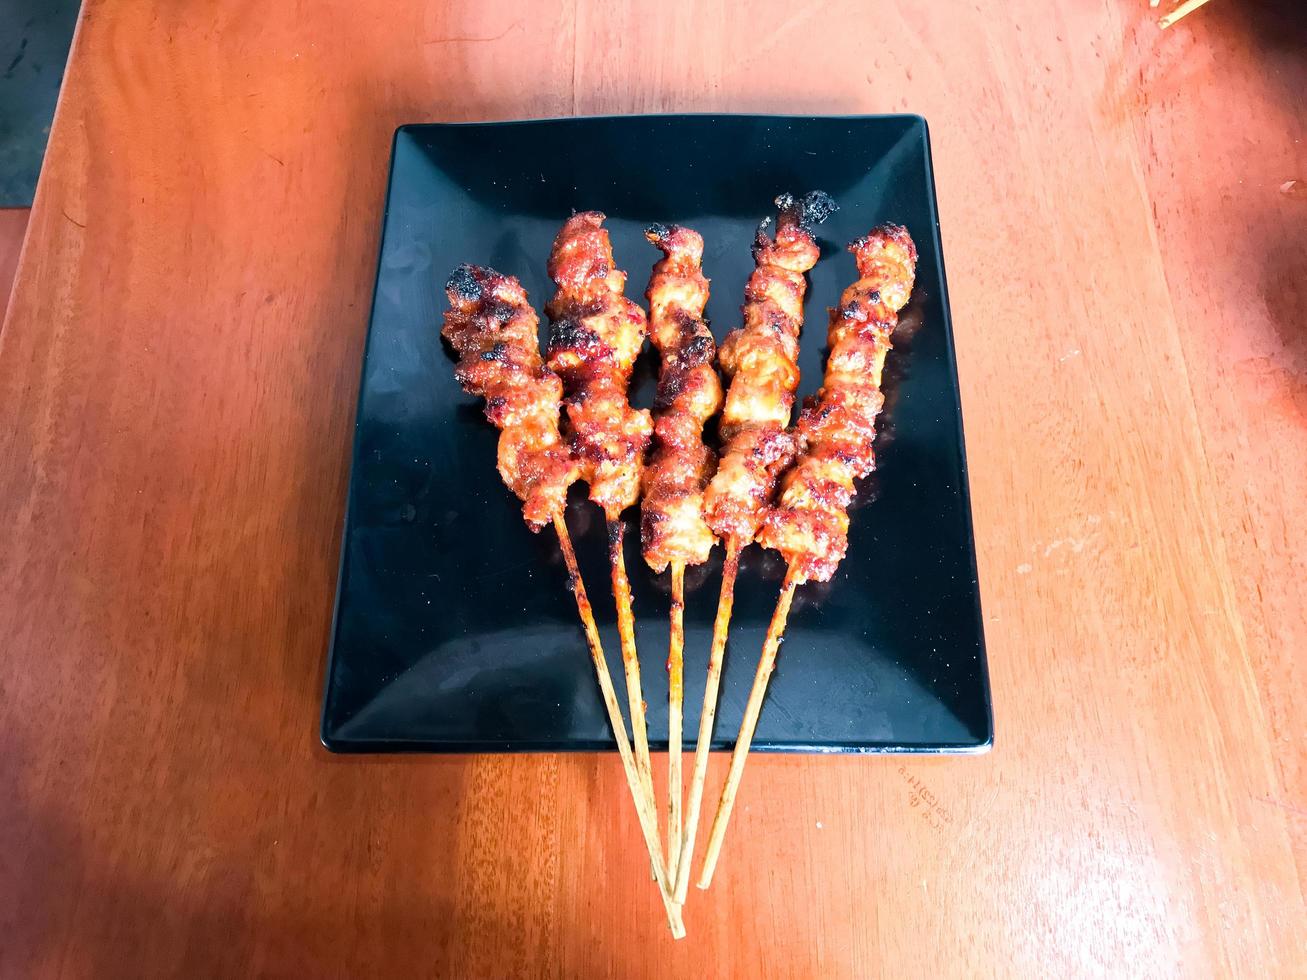 There are five skewers of blushing spicy chicken photo